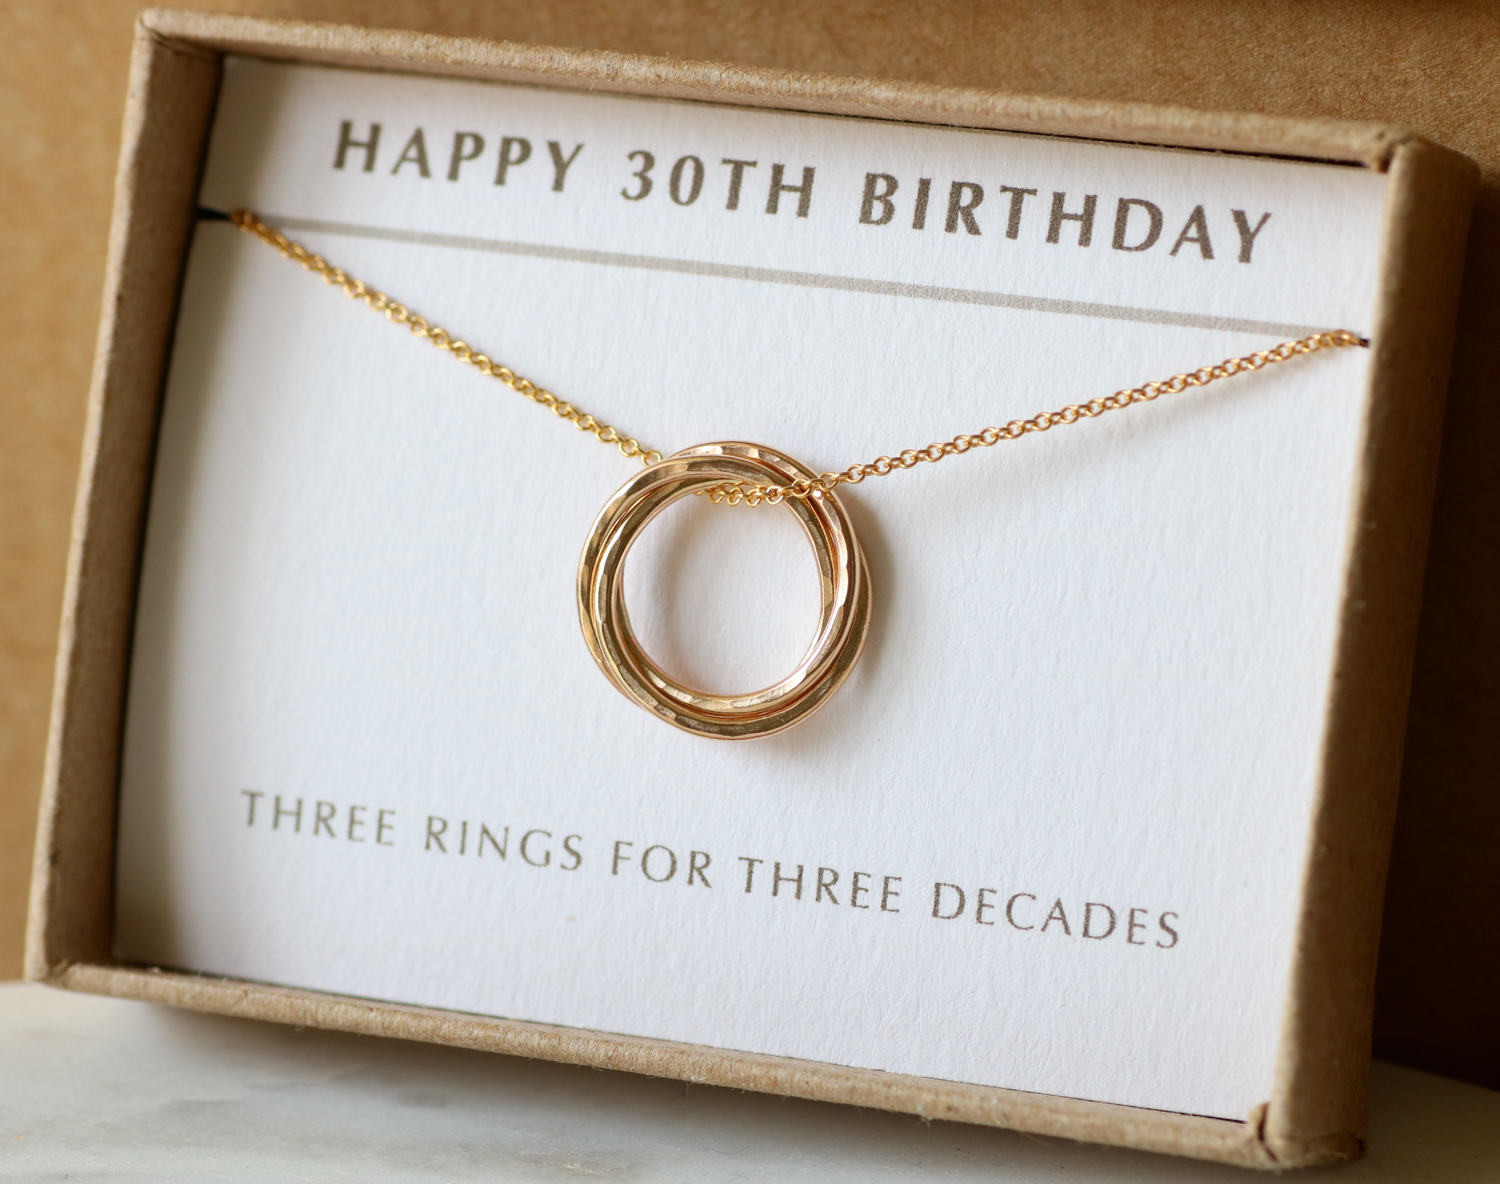 30th Birthday Gift Ideas For Sister
 30th birthday t idea 3 sisters necklace 3 best friend